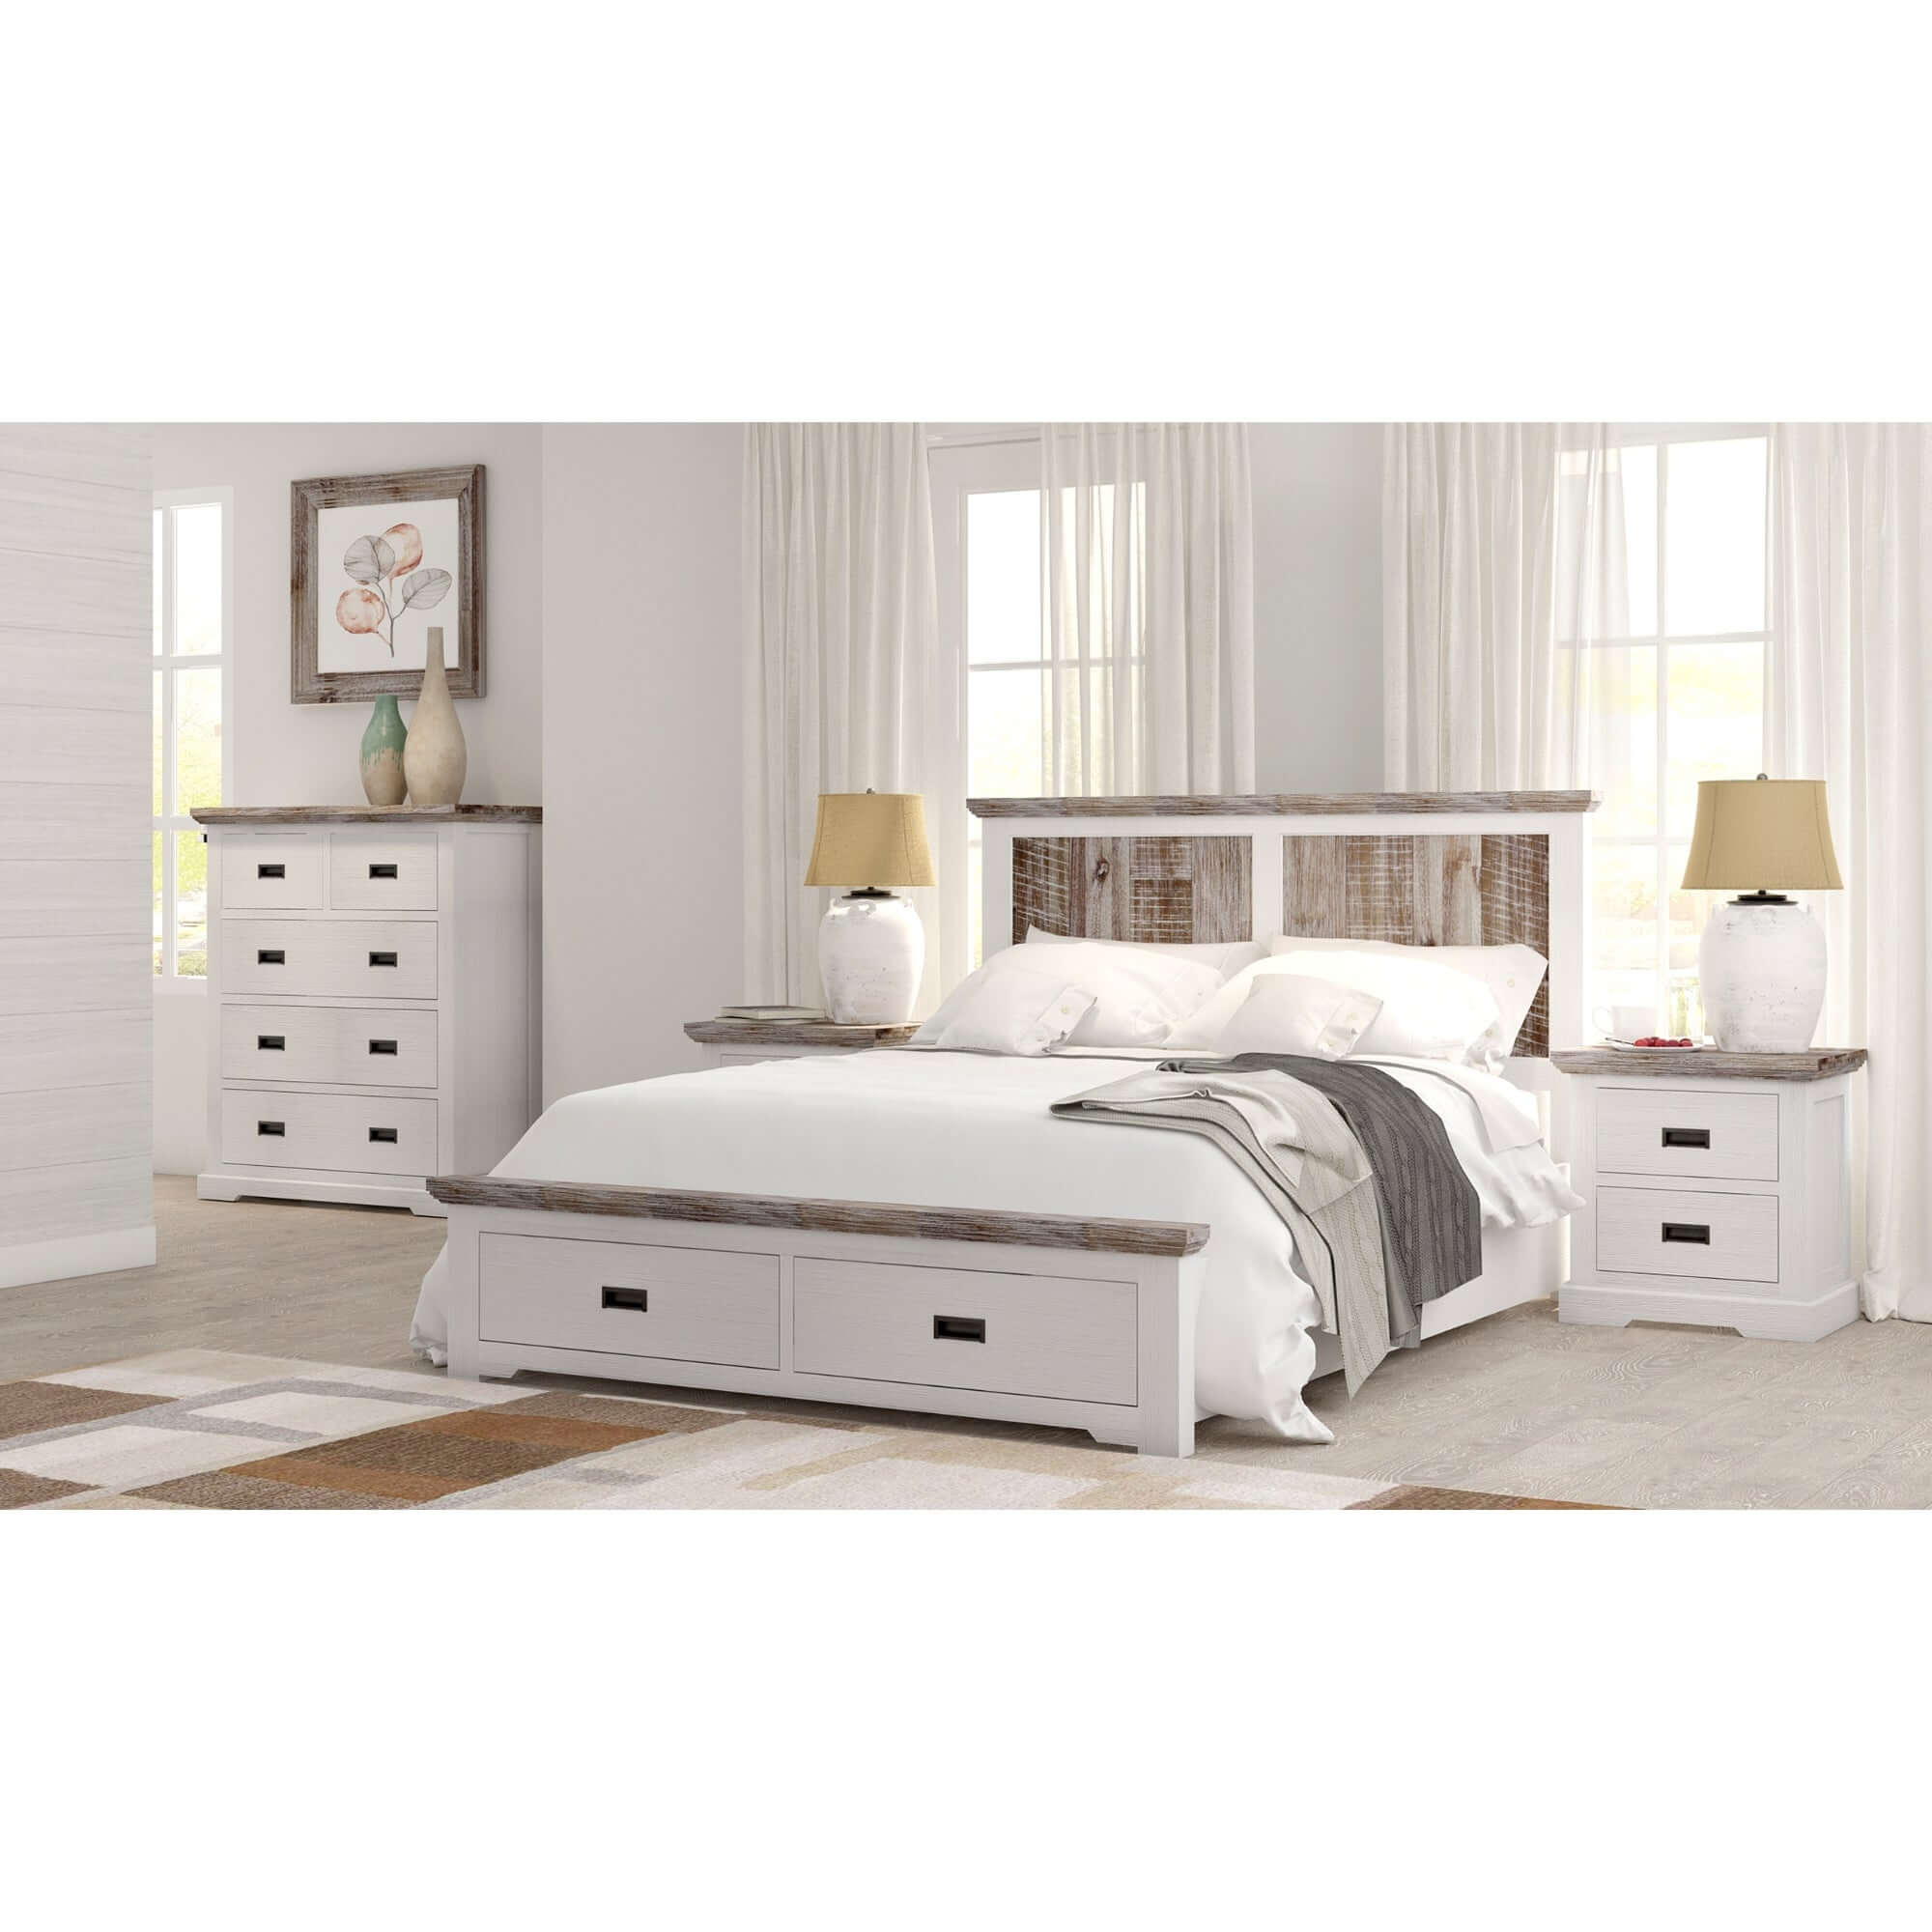 King Size Fiona Bed Frame with Storage Drawers-Upinteriors